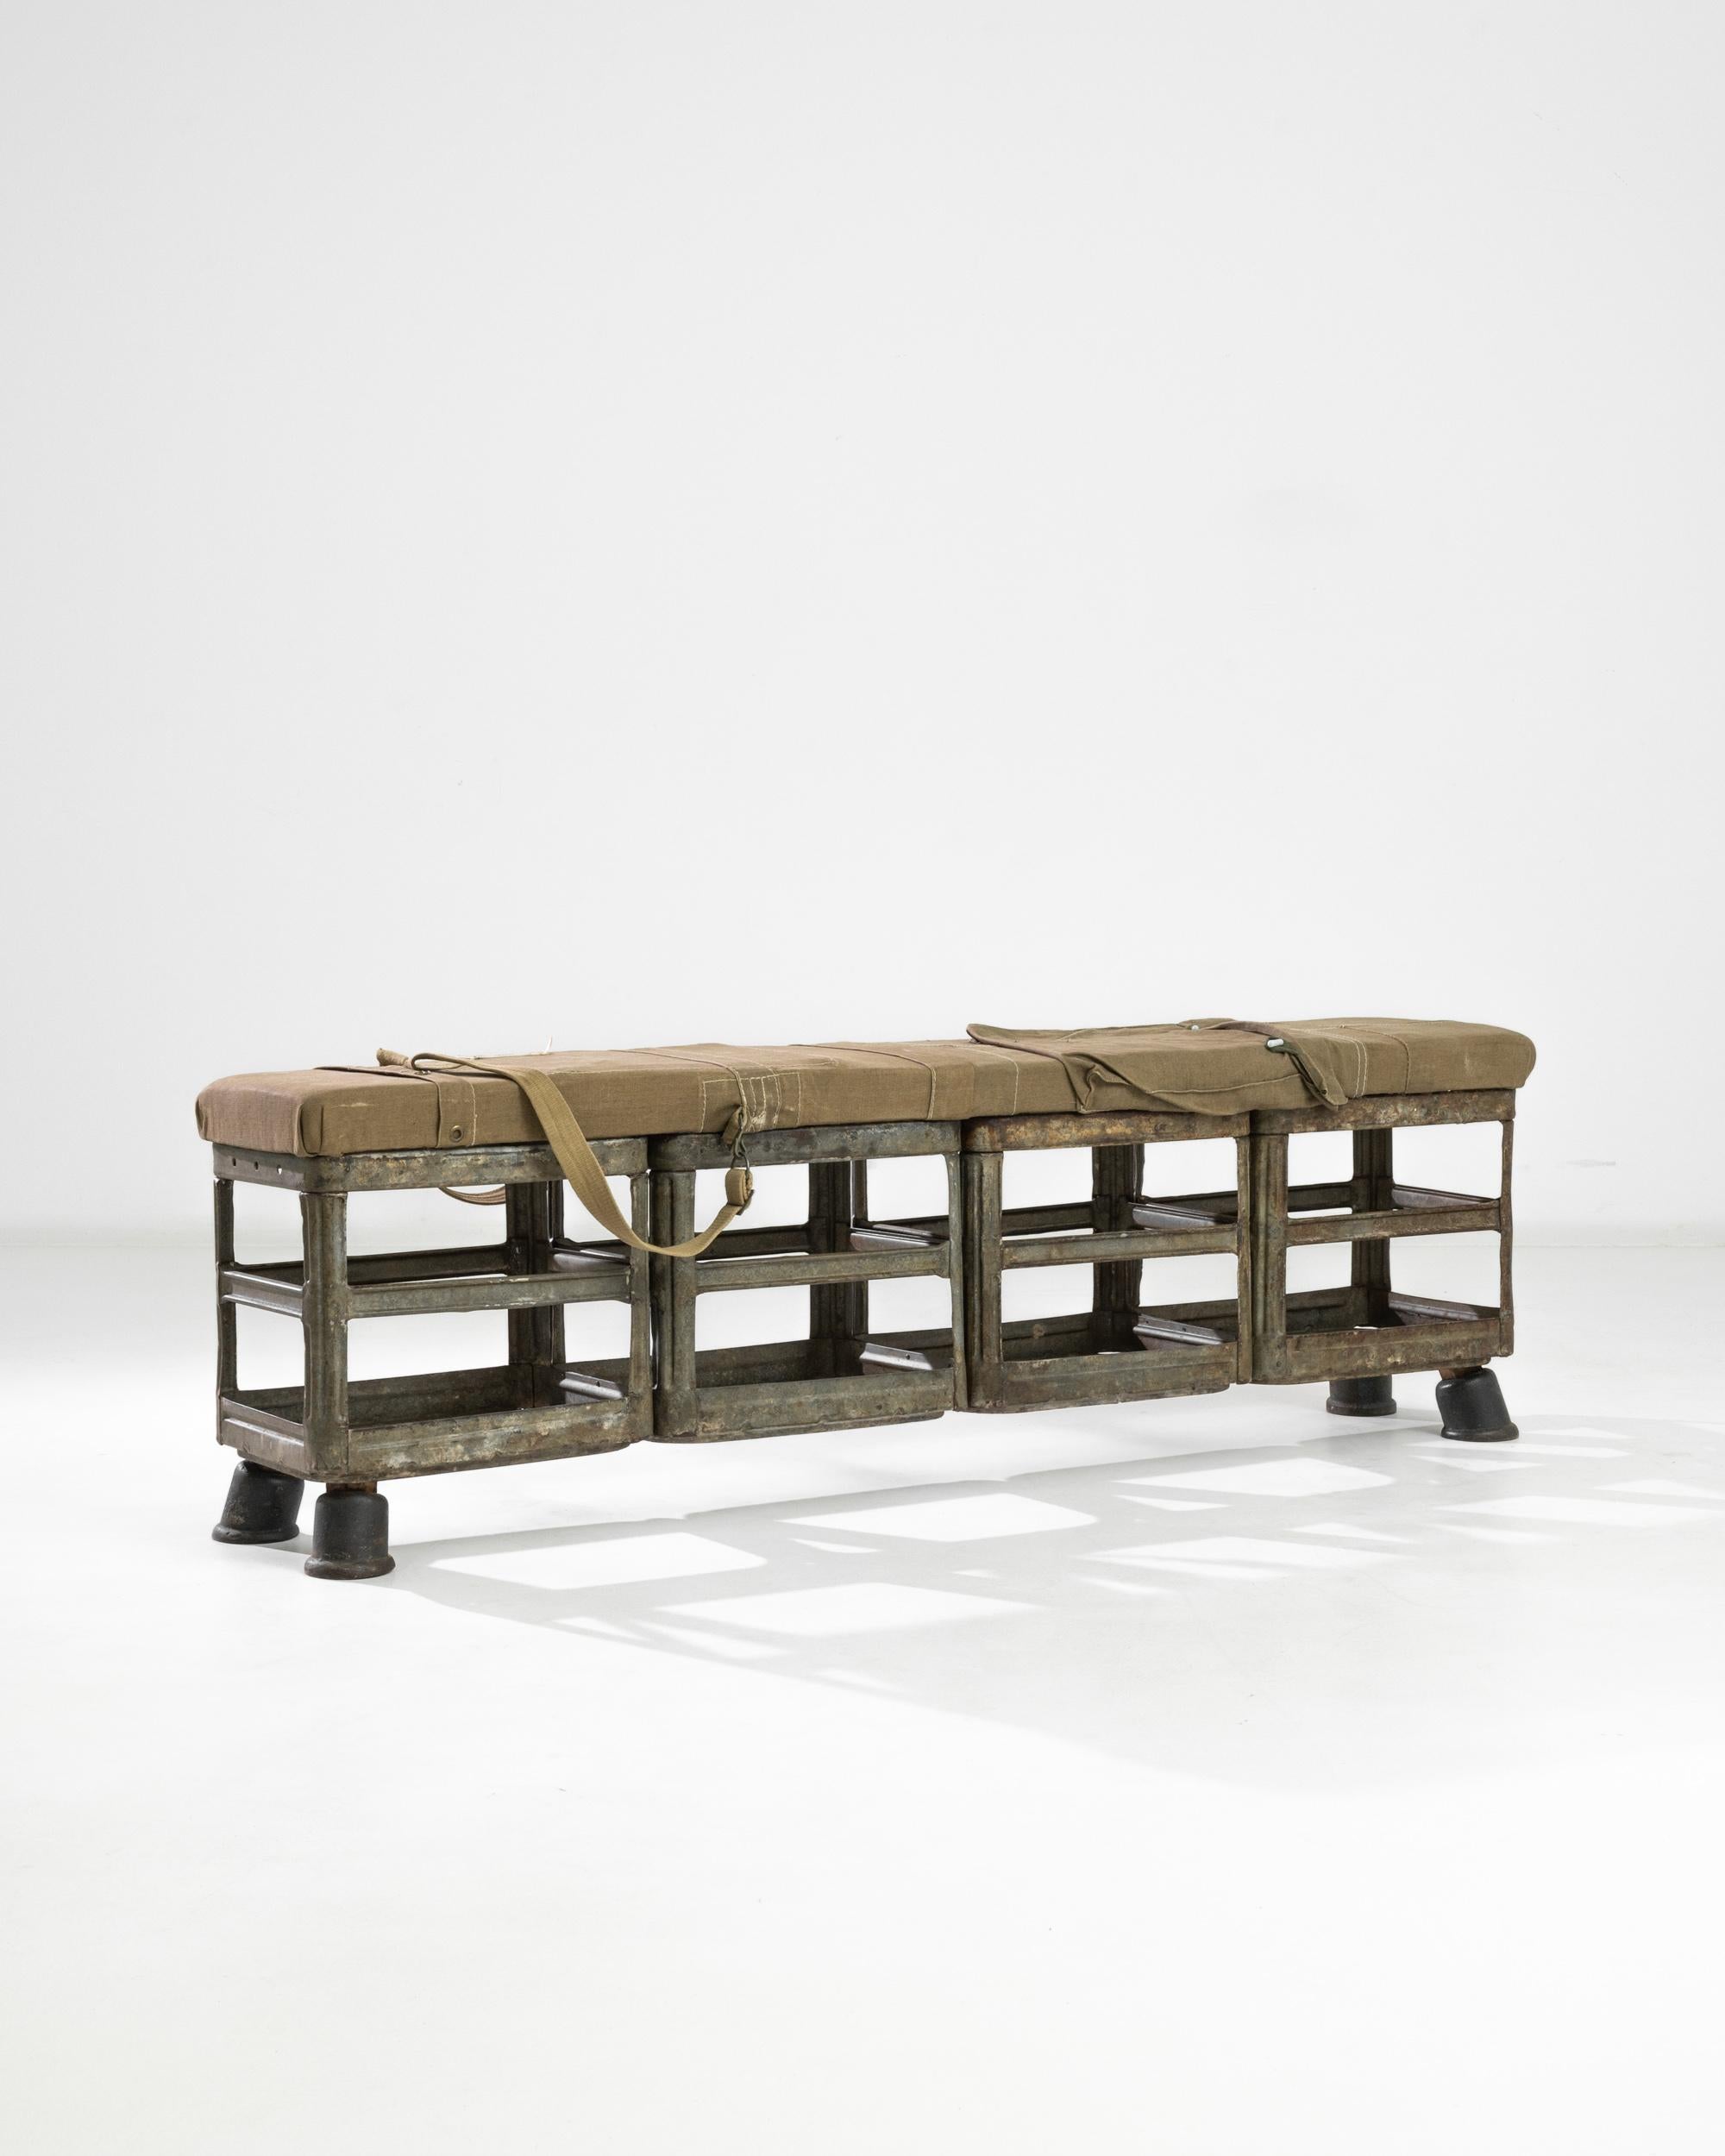 A metal bench with upholstered seat from Central Europe, produced during the 20th century. Four metal crates stacked sideways and resting on four lightly angled feet, topped by an olive-beige upholstered cushion. Looking like vintage military